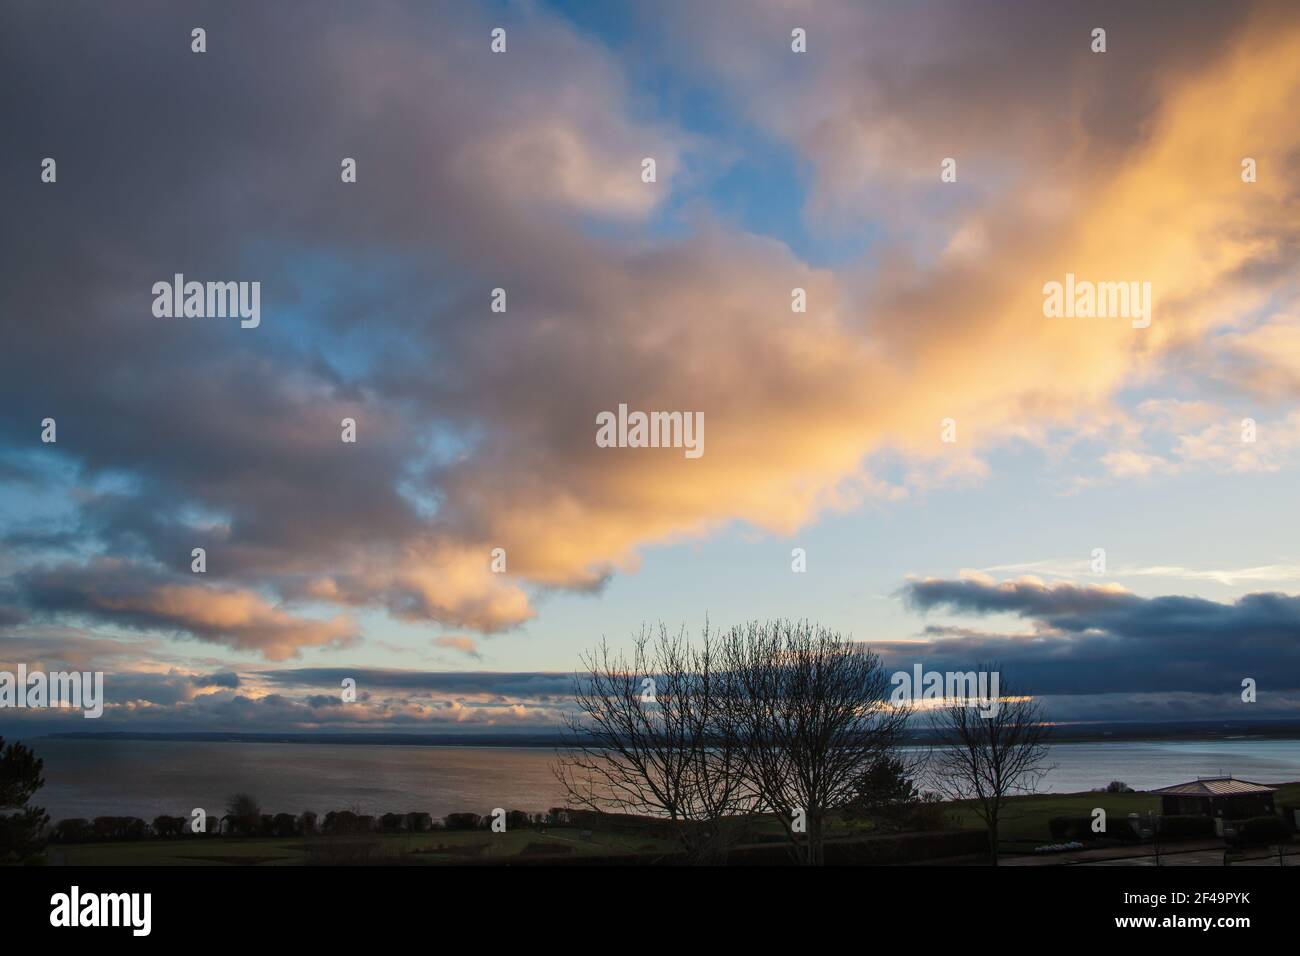 Silhouetted winter trees on an esplanade in front of a bay of water as the sunset illuminates the clouds. Stock Photo